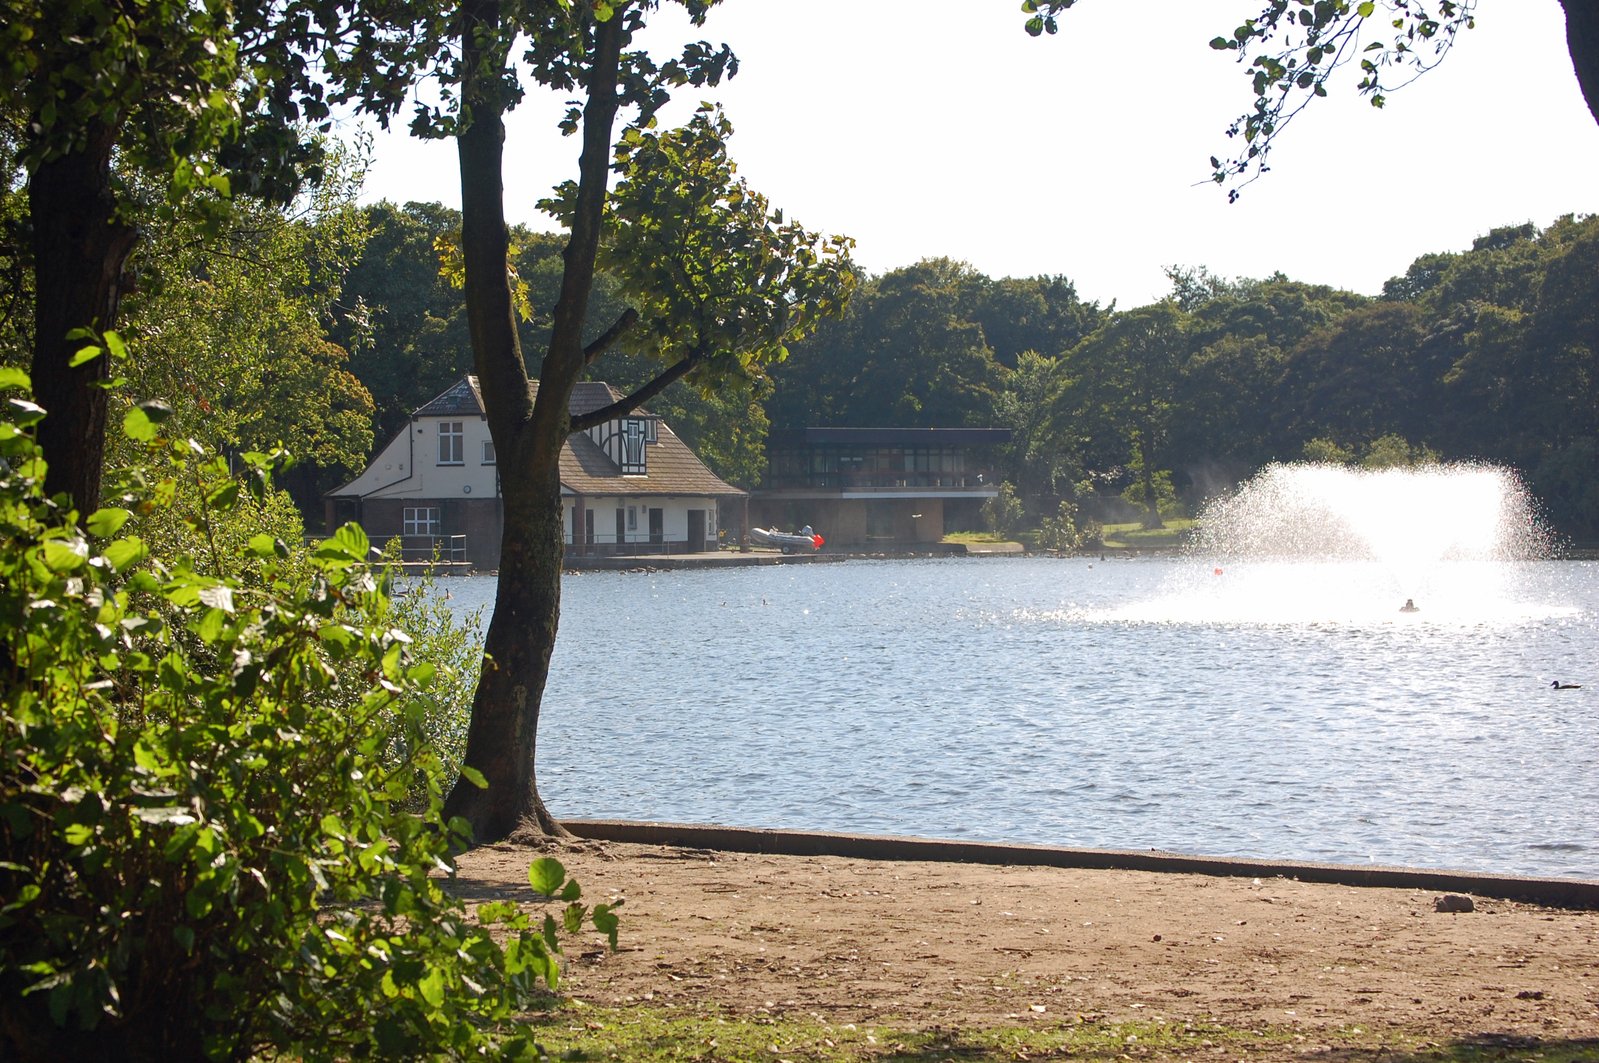 two people are swimming in the water near a house